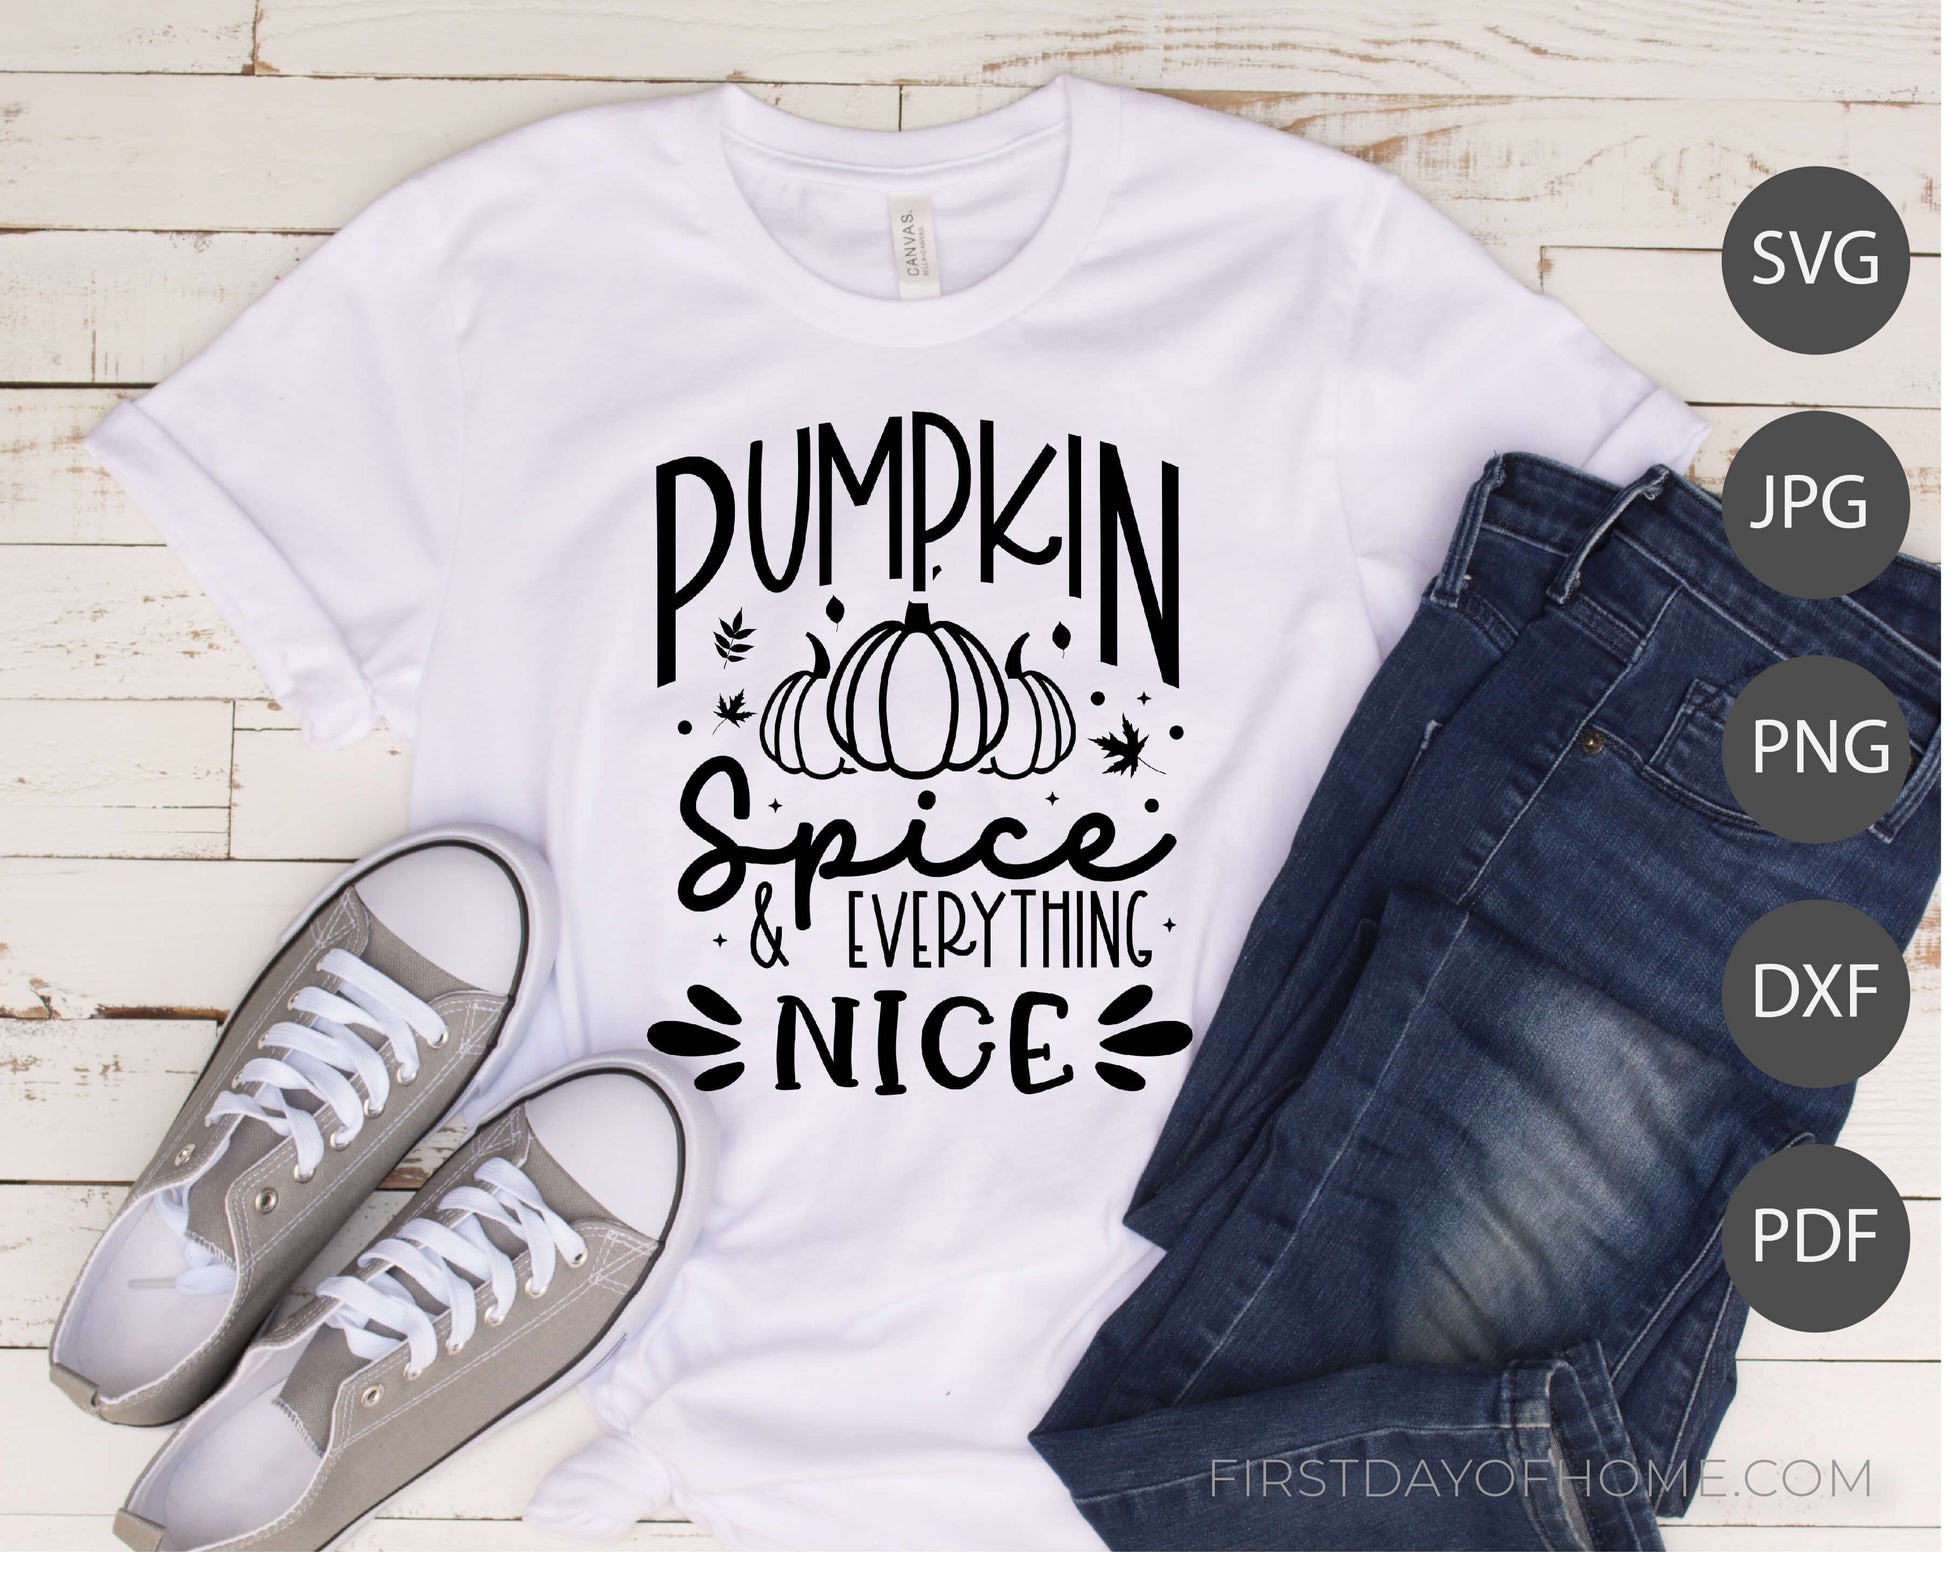 Mockup example of t-shirt with the words "Pumpkin Spice & Everything Nice" with pumpkins and fall leaves, shown with denim jeans and sneakers